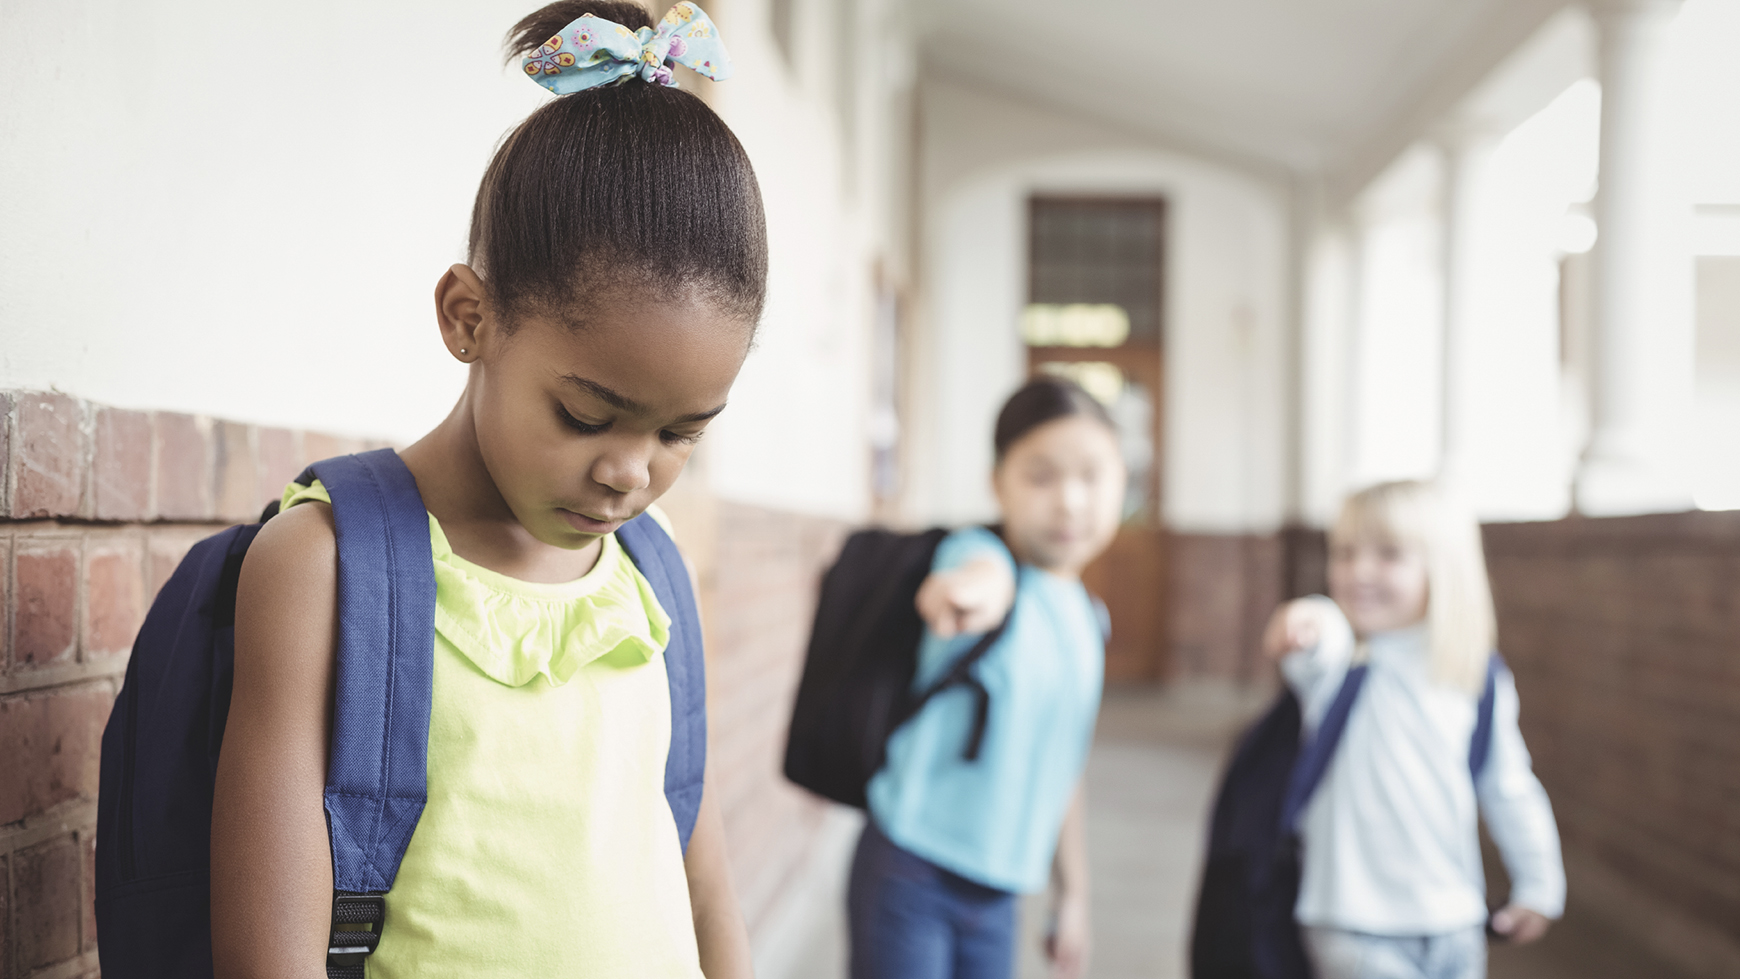 Bullying What to Do When Your Child Is the Bully